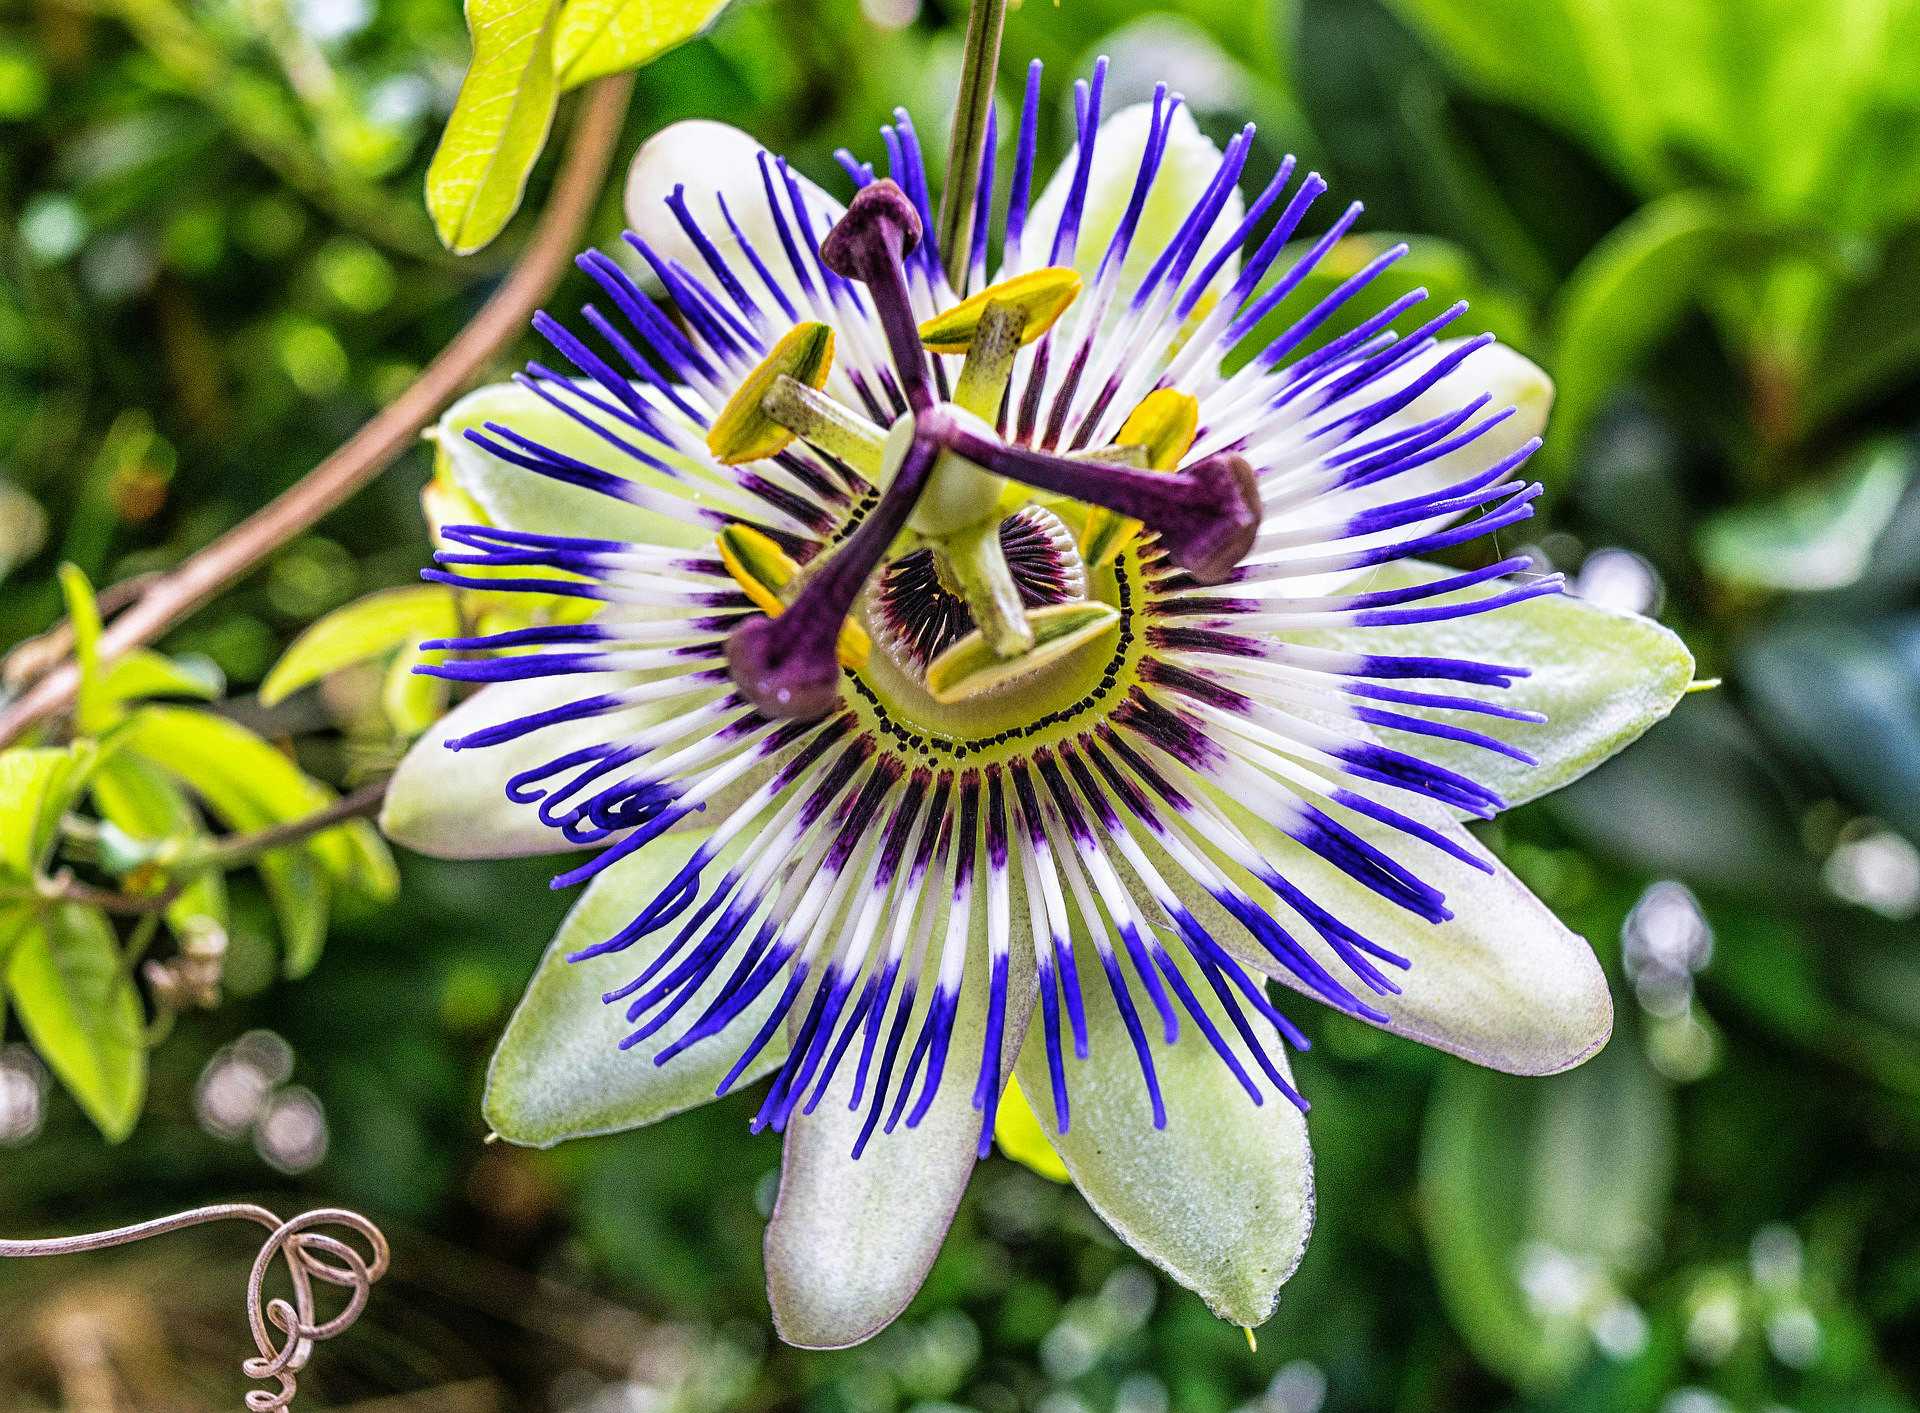 Passion Flower in bloom